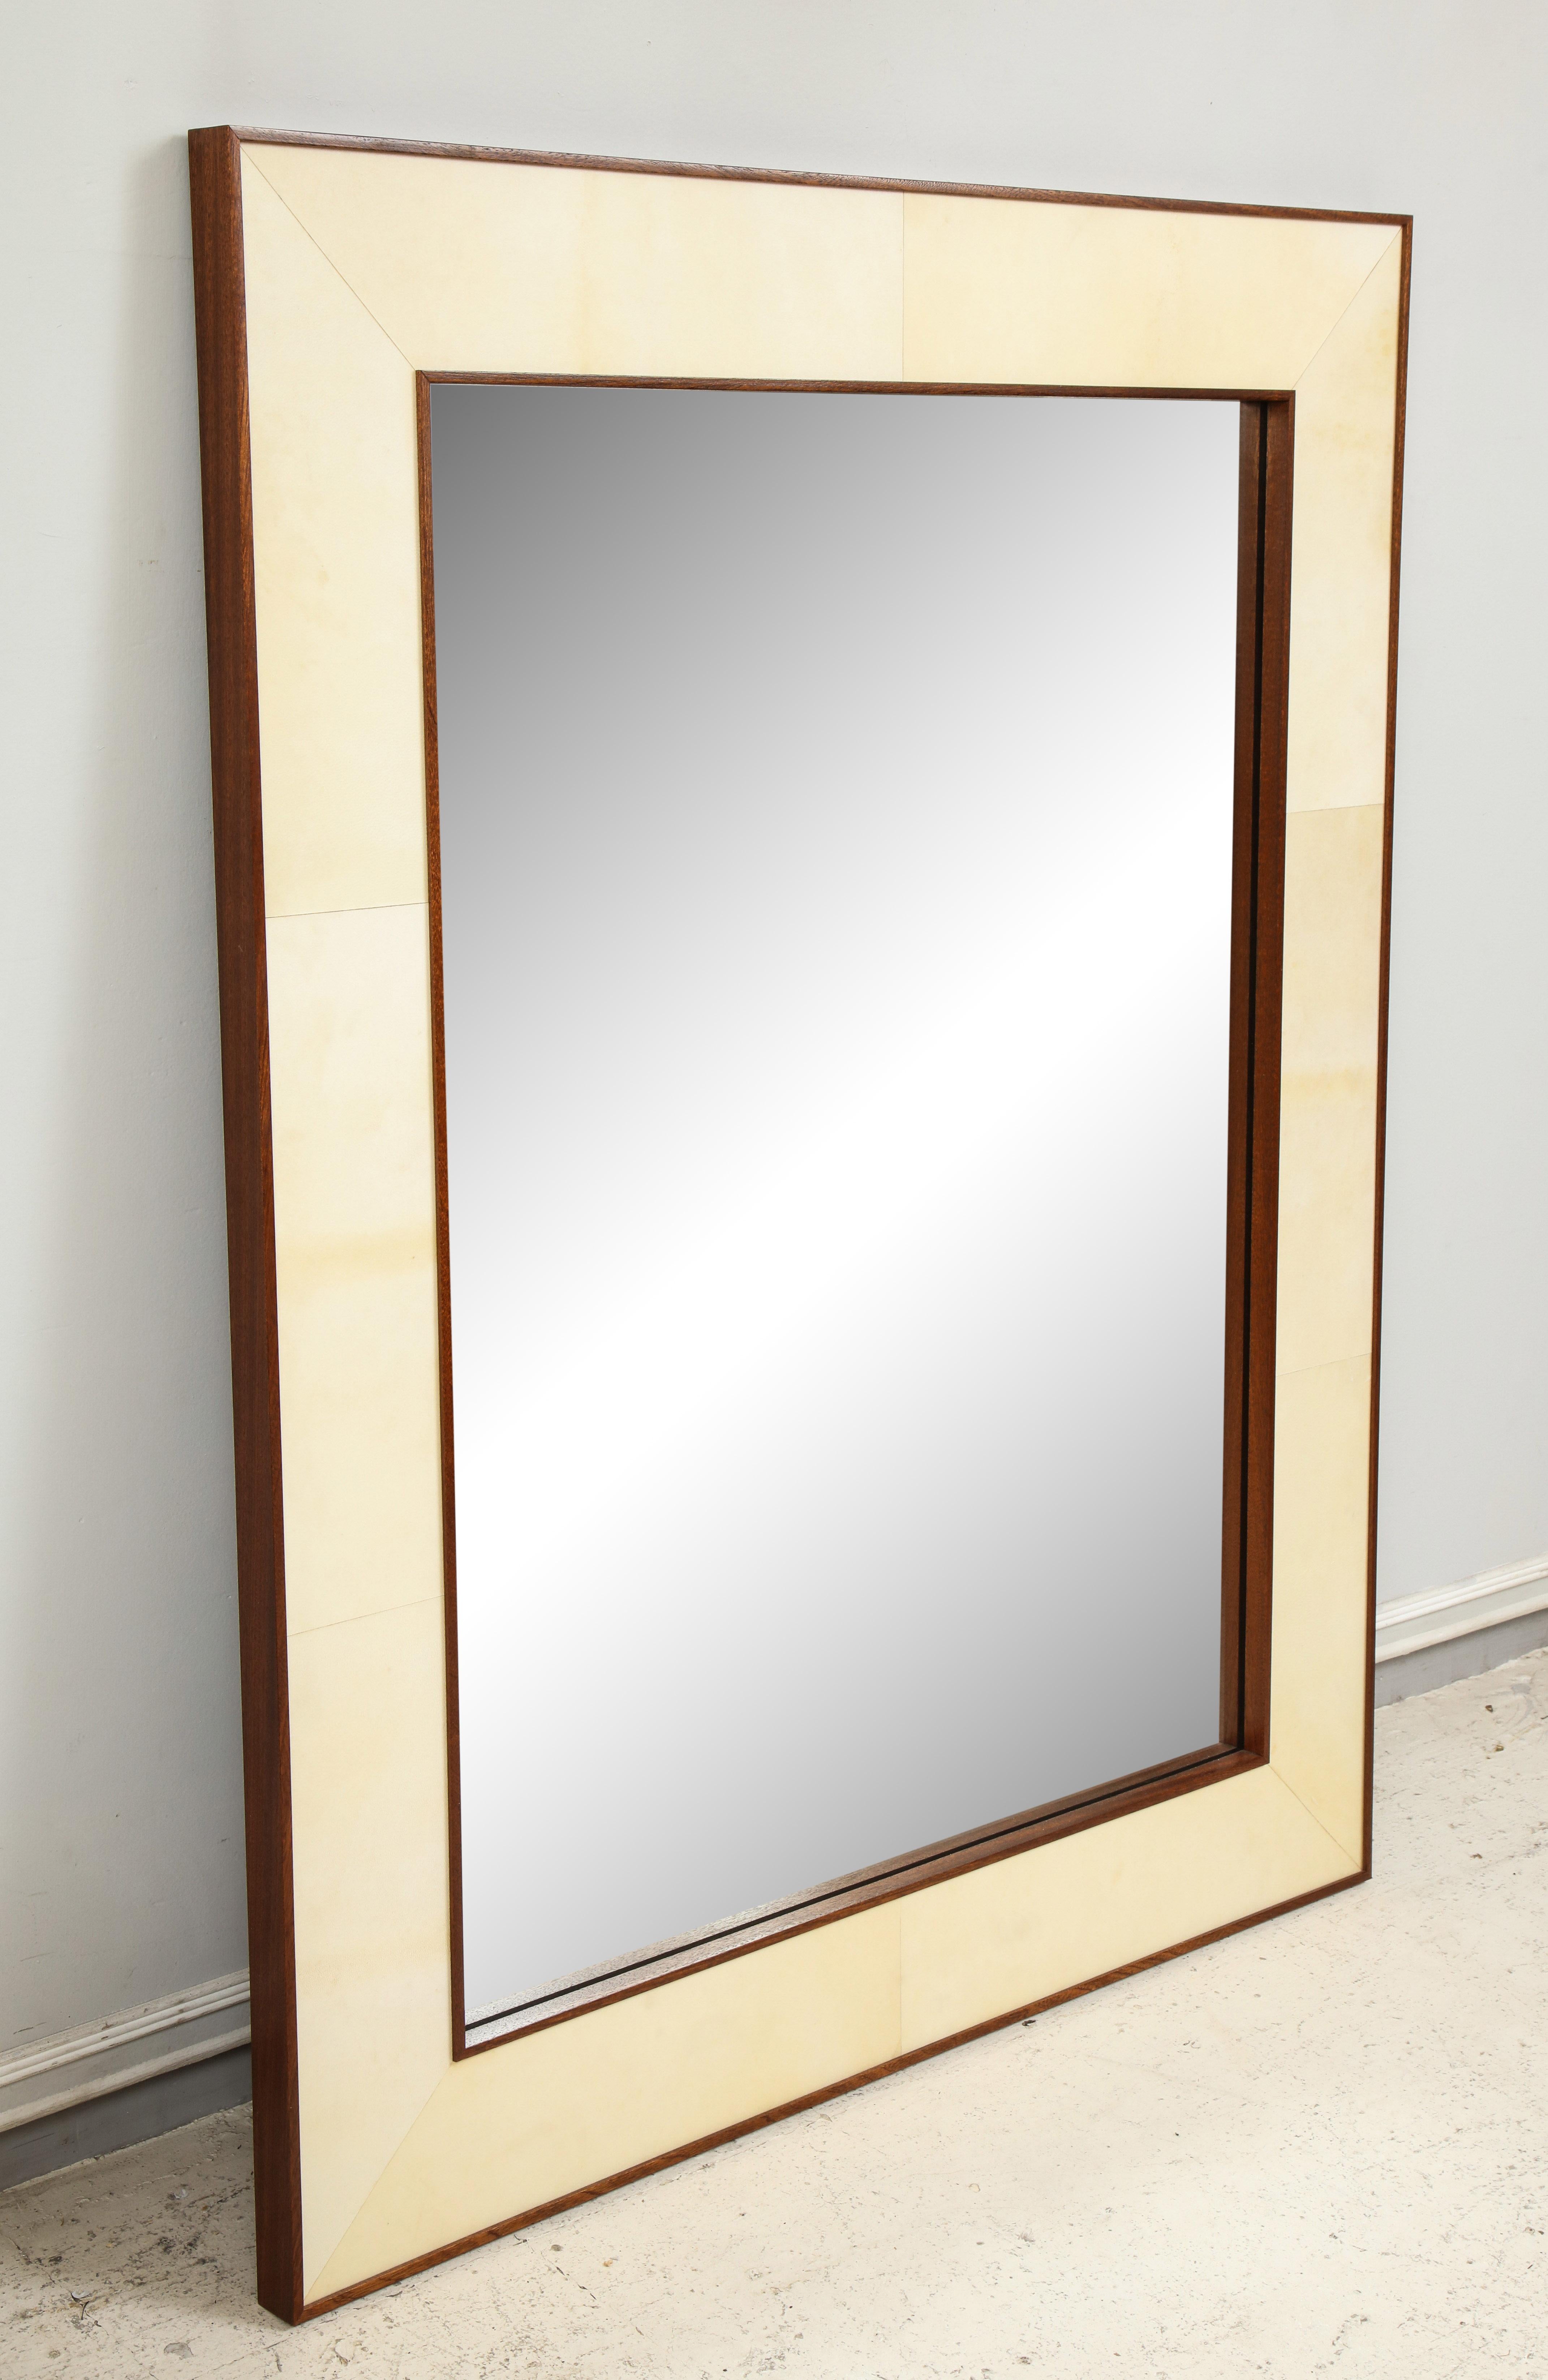 Custom parchment mirror with mahogany frame. 
Please note that this mirror is customizable.
Lead Time is 8-10 weeks for a custom order.